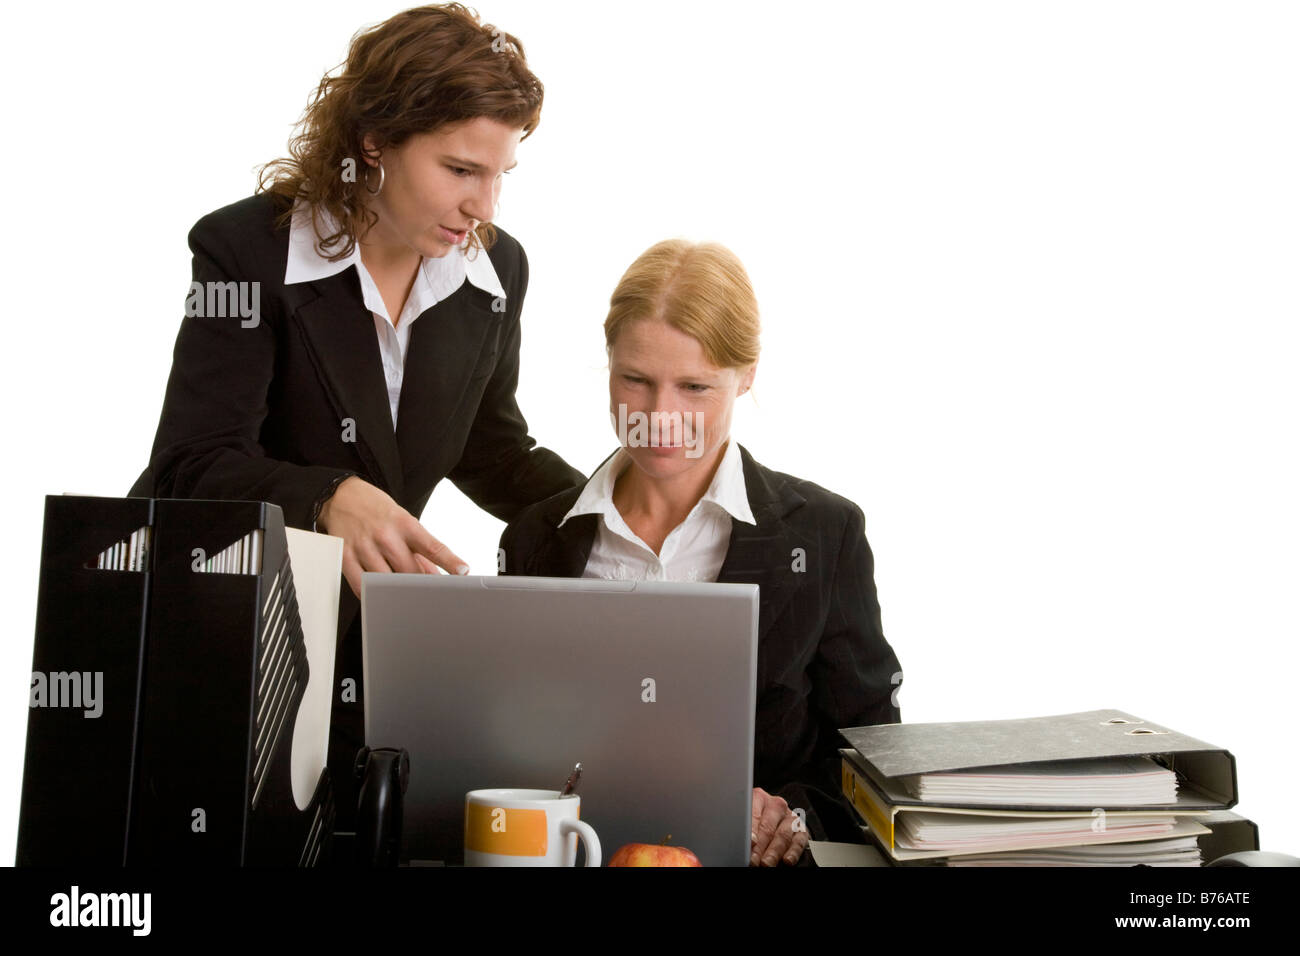 Two clerks at the office Stock Photo Alamy